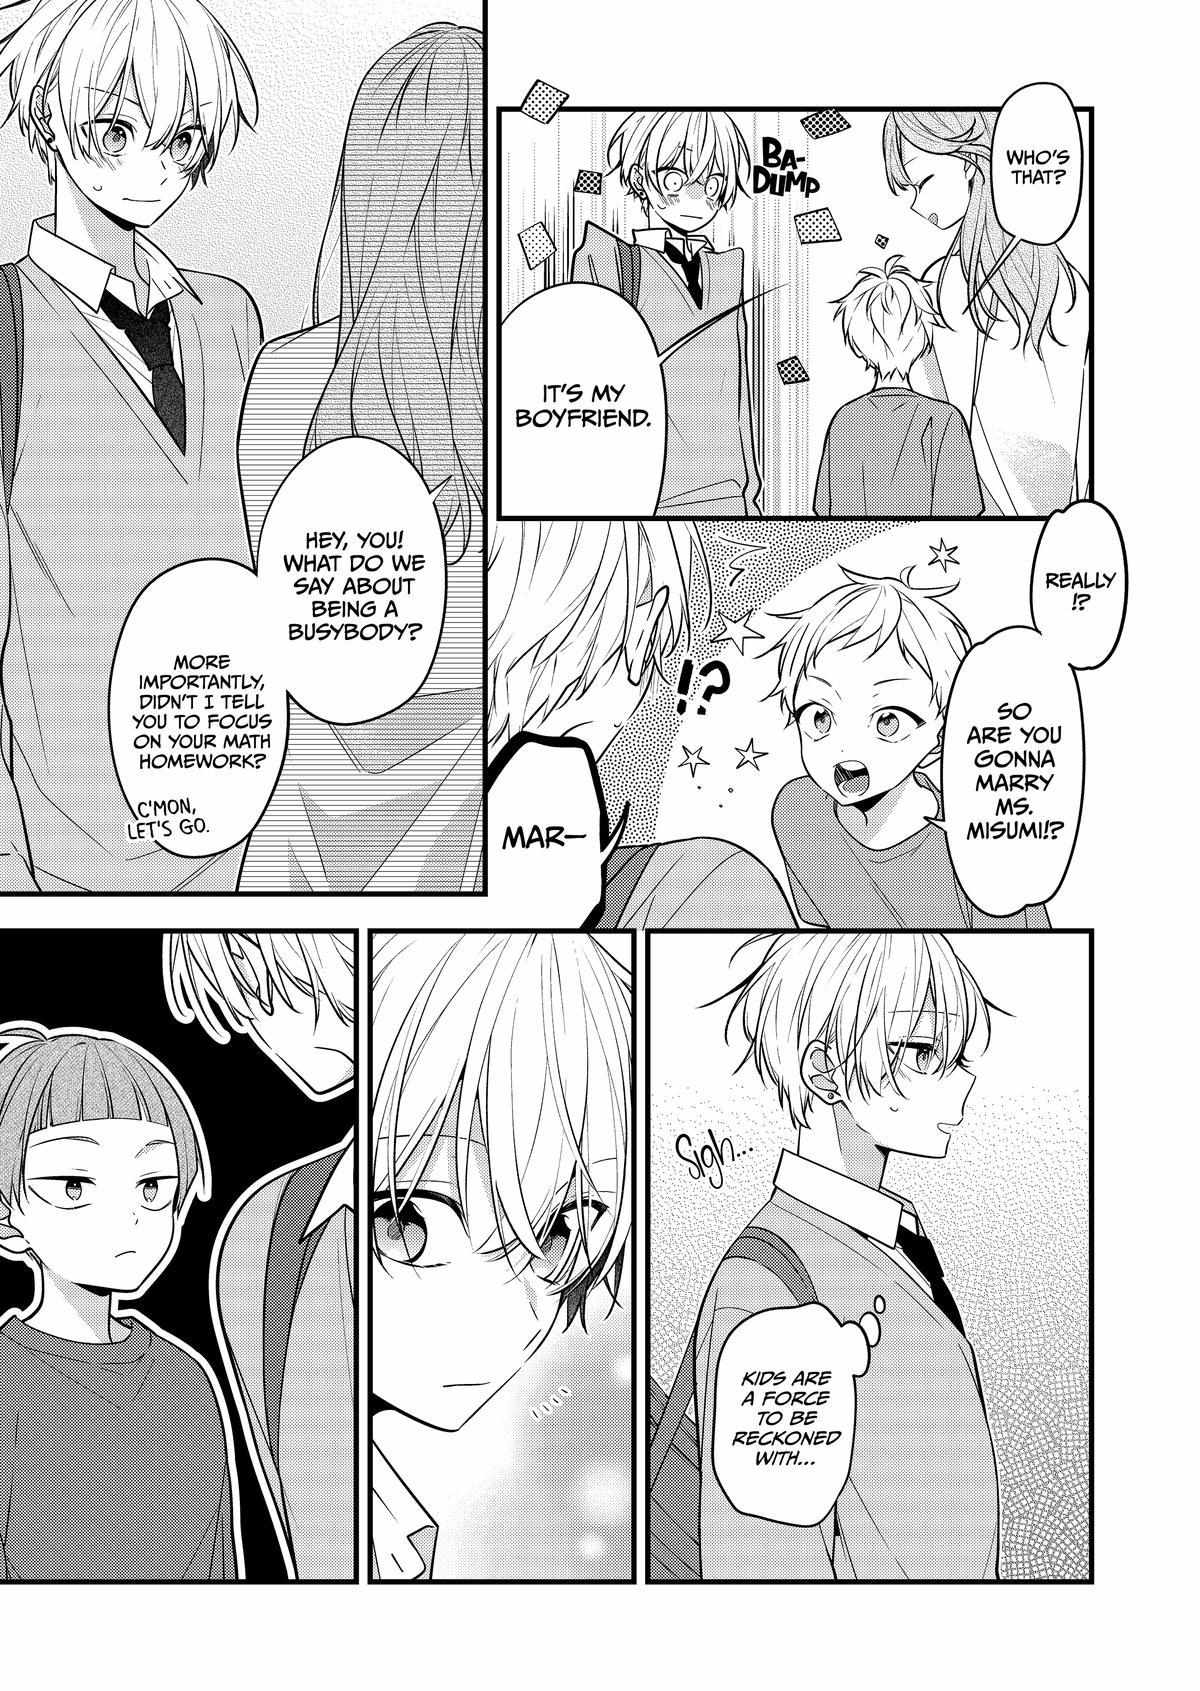 The Story Of A Guy Who Fell In Love With His Friend's Sister - Page 3